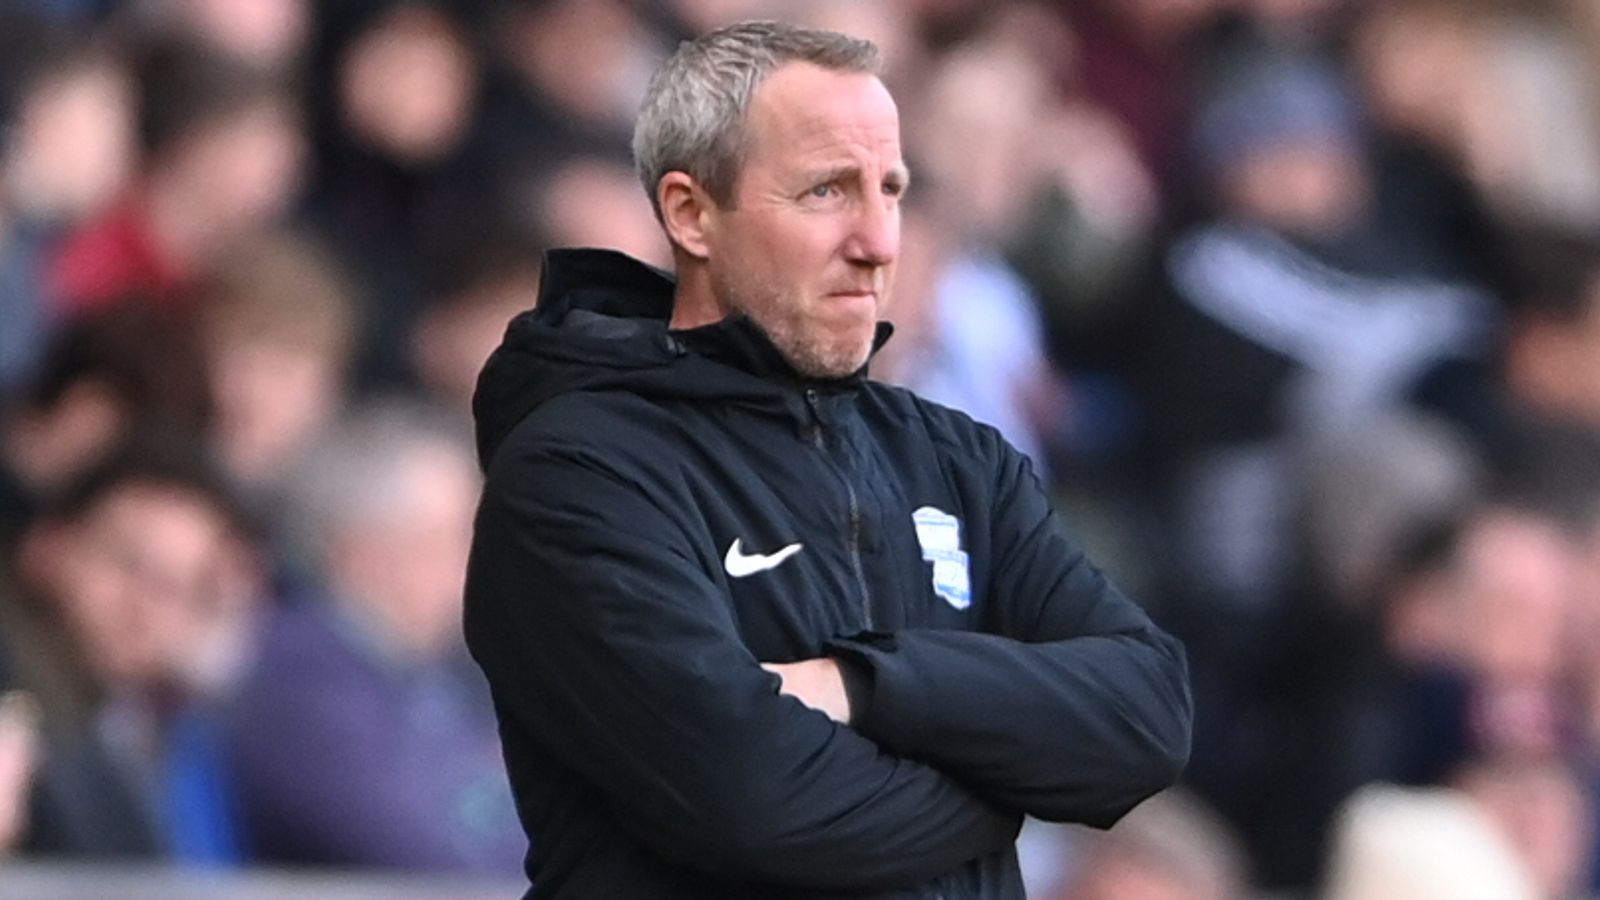 Lee Bowyer: Birmingham City sack head coach after 16 months in charge